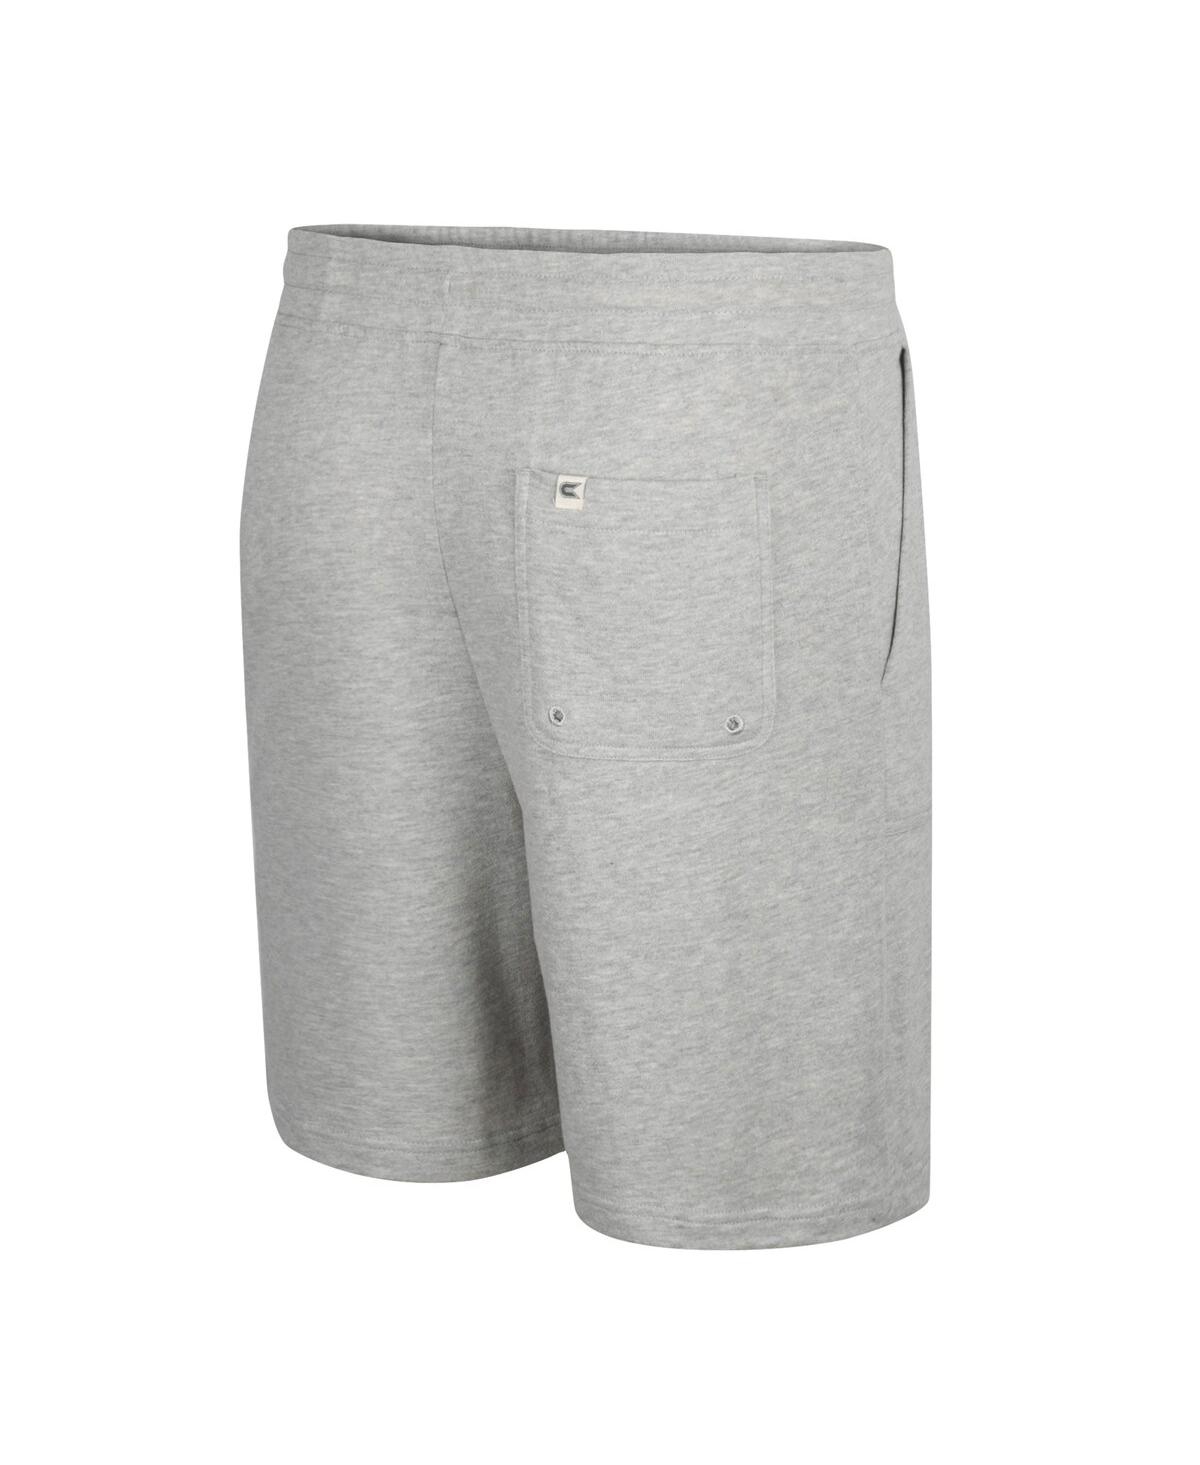 Shop Colosseum Men's  Heather Gray Pitt Panthers Love To Hear This Terry Shorts